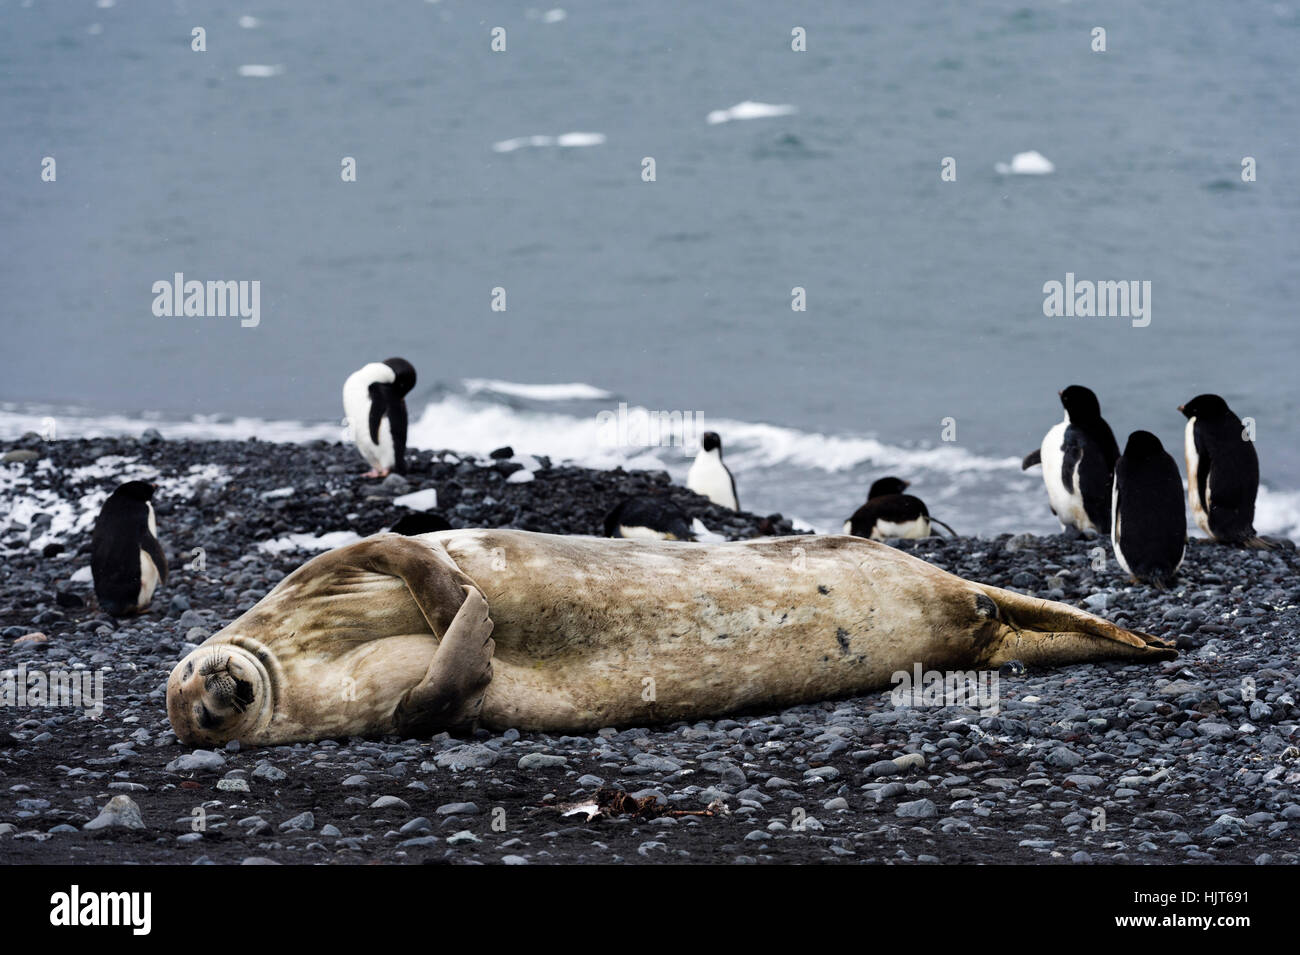 A Weddell Seal sleeping on a black volcanic beach in Antarctica. Stock Photo